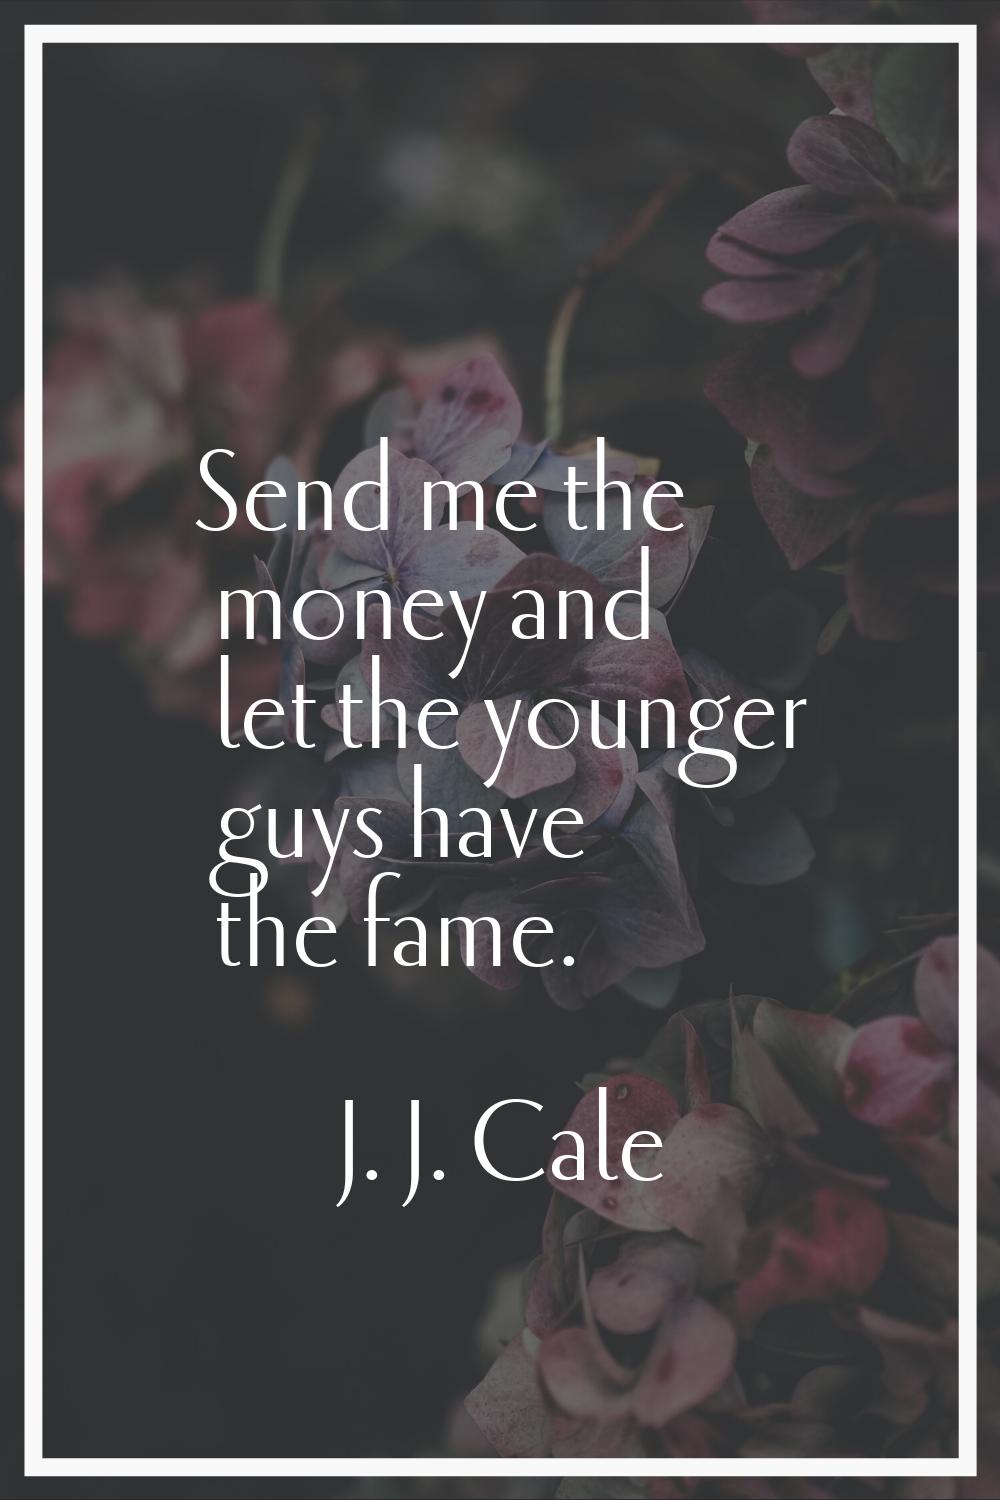 Send me the money and let the younger guys have the fame.